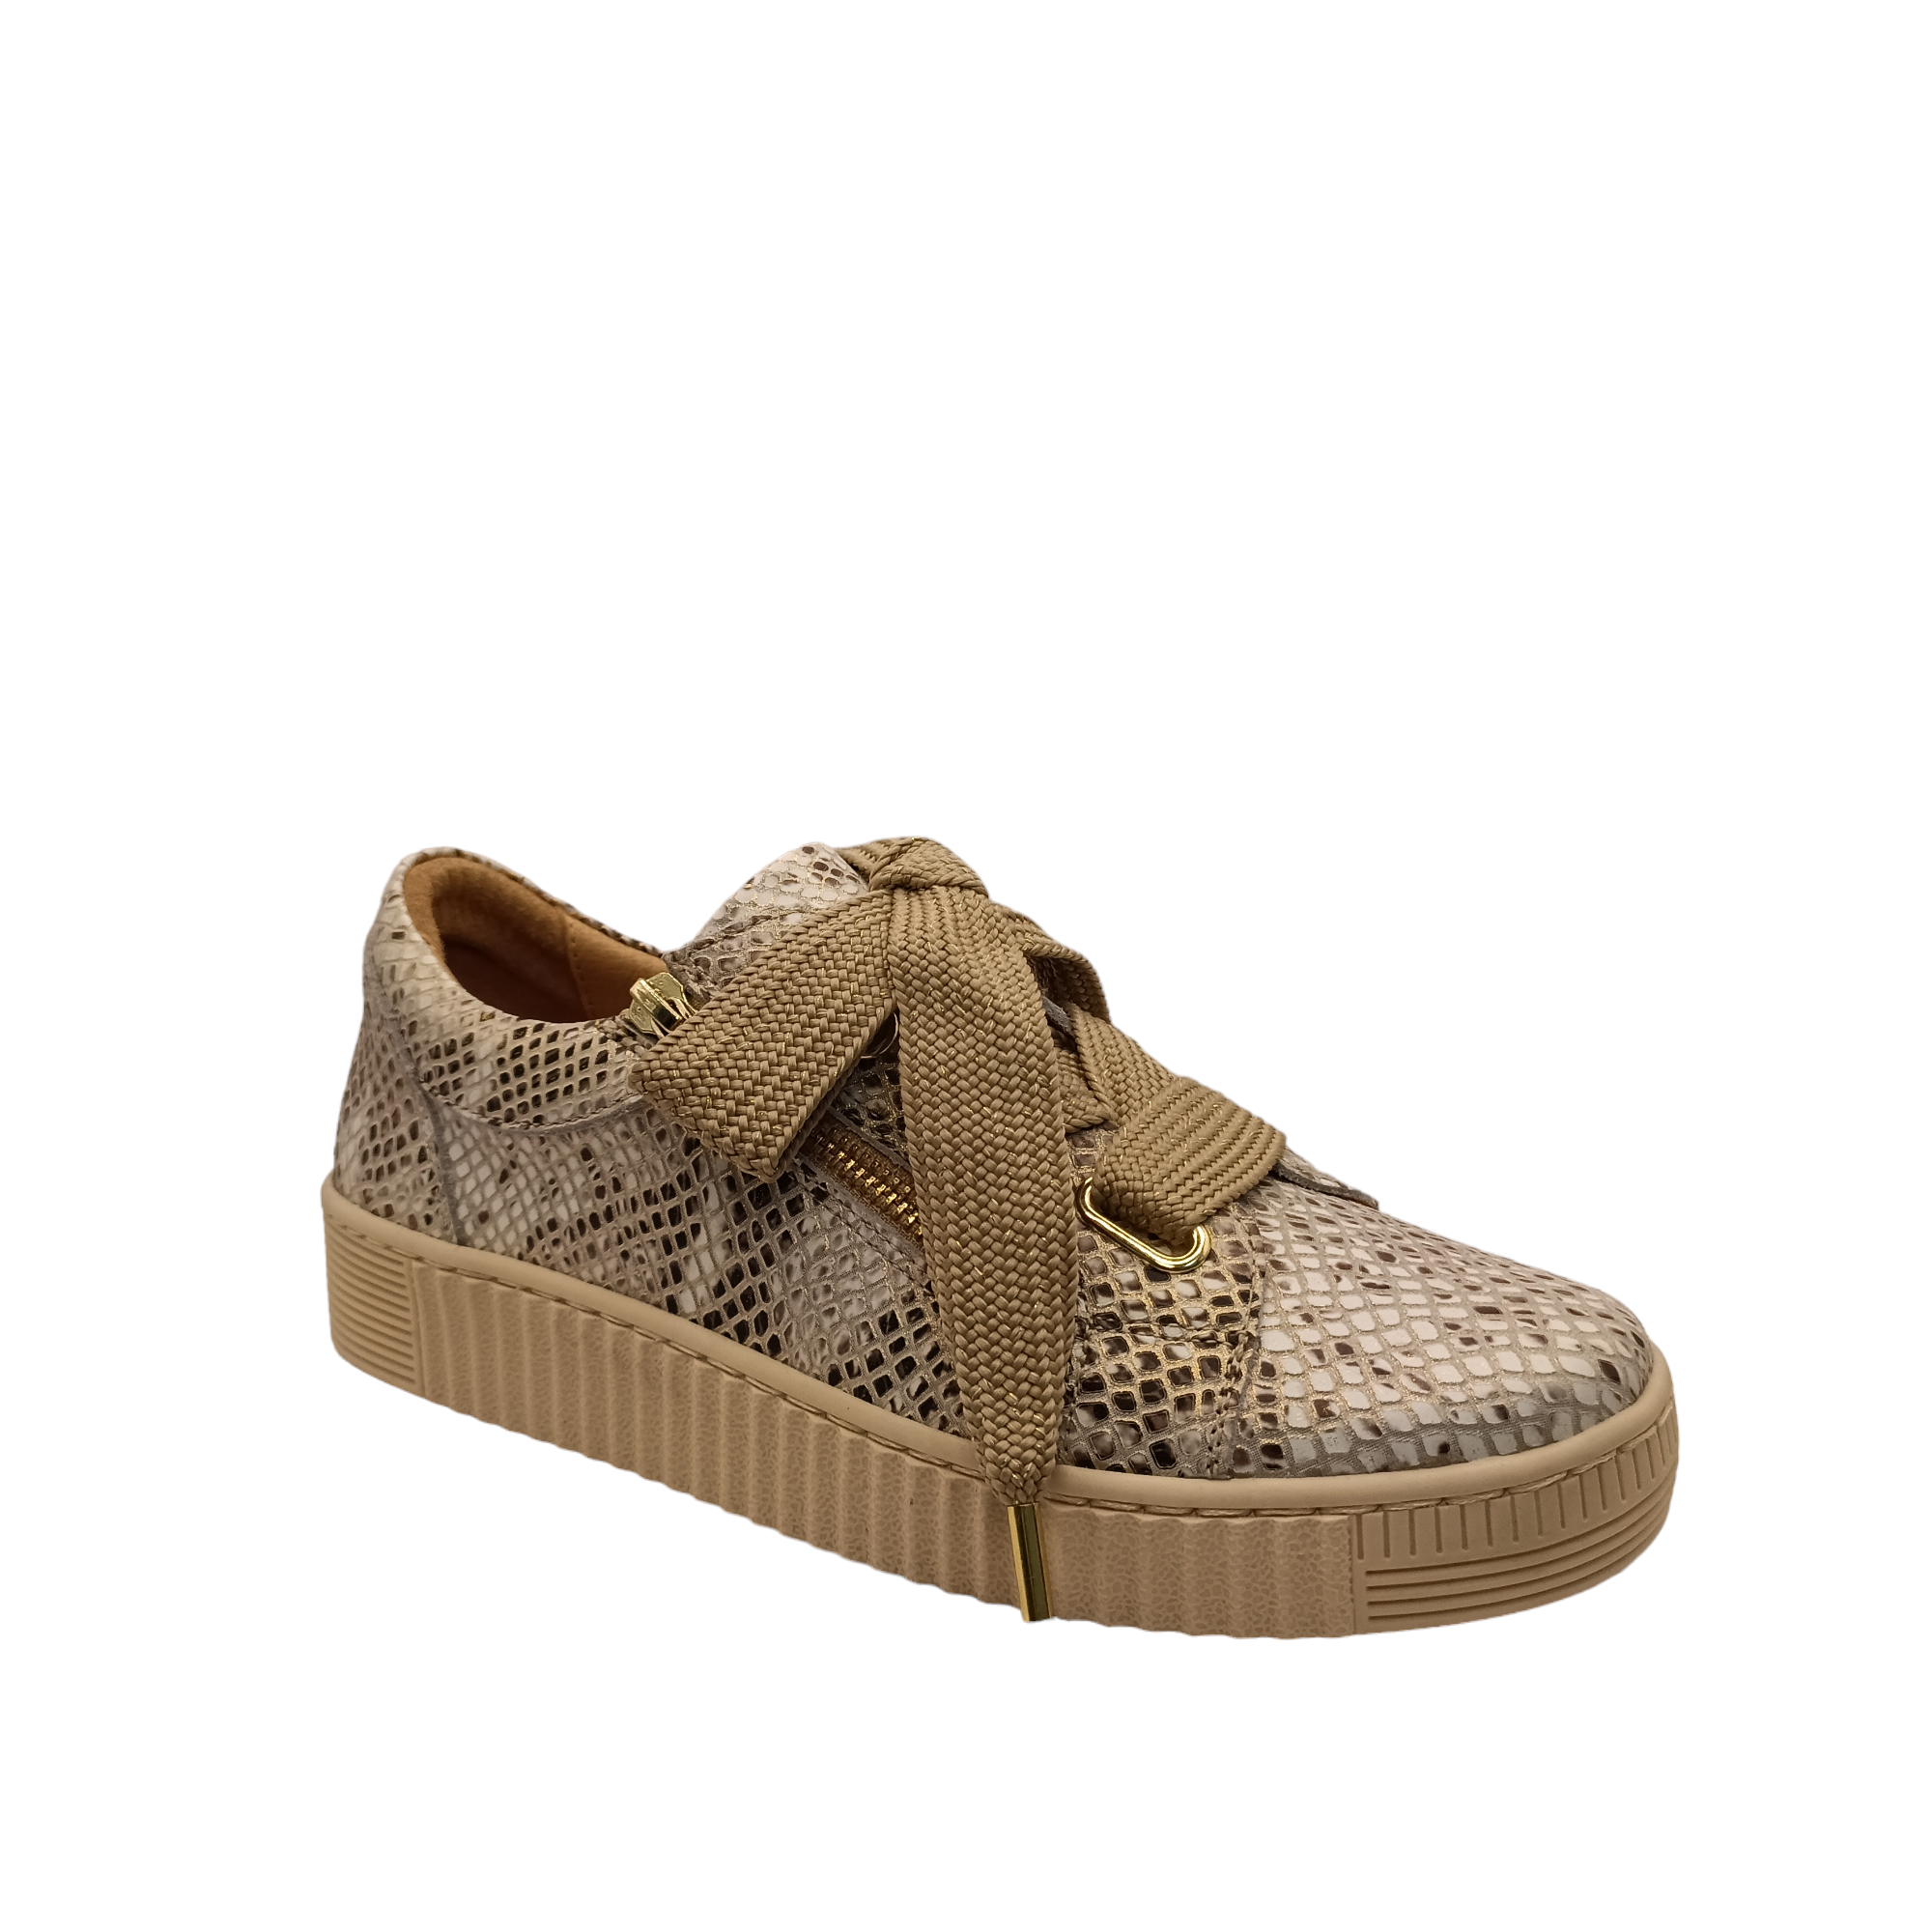 Shop Jovi 2 EOS - with shoe&me - from EOS - Sneaker - Sneaker, Summer, Winter, Womens - [collection]